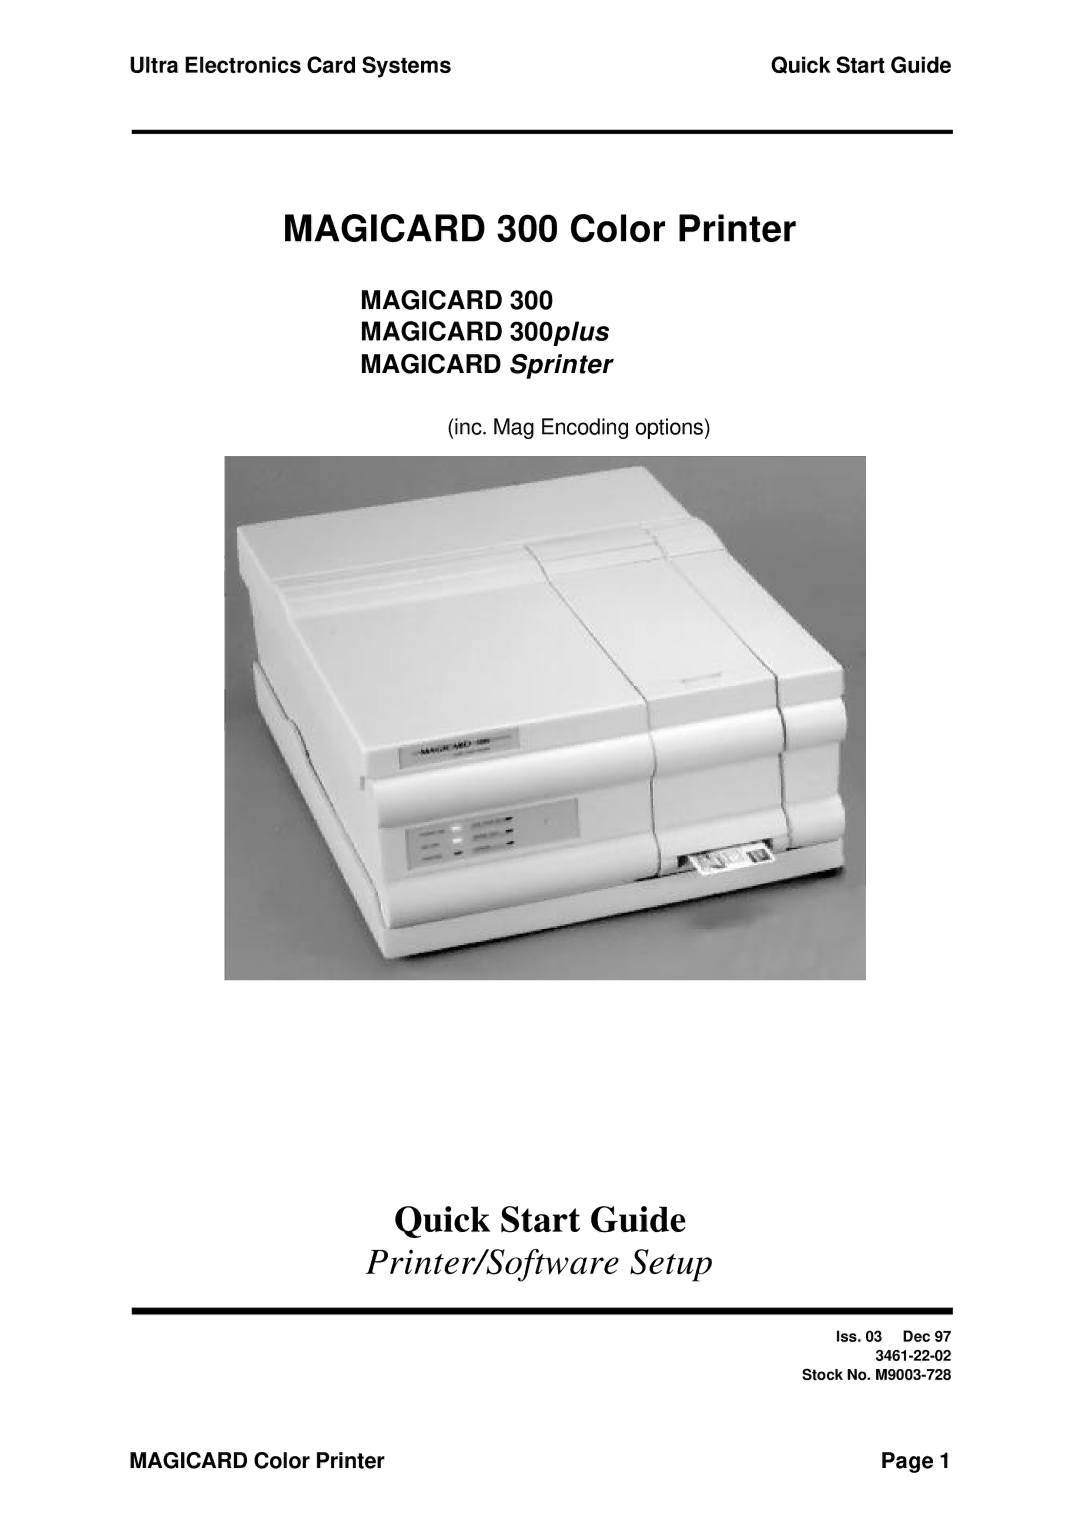 Ultra electronic quick start Magicard 300 Color Printer, Magicard 300plus Magicard Sprinter 